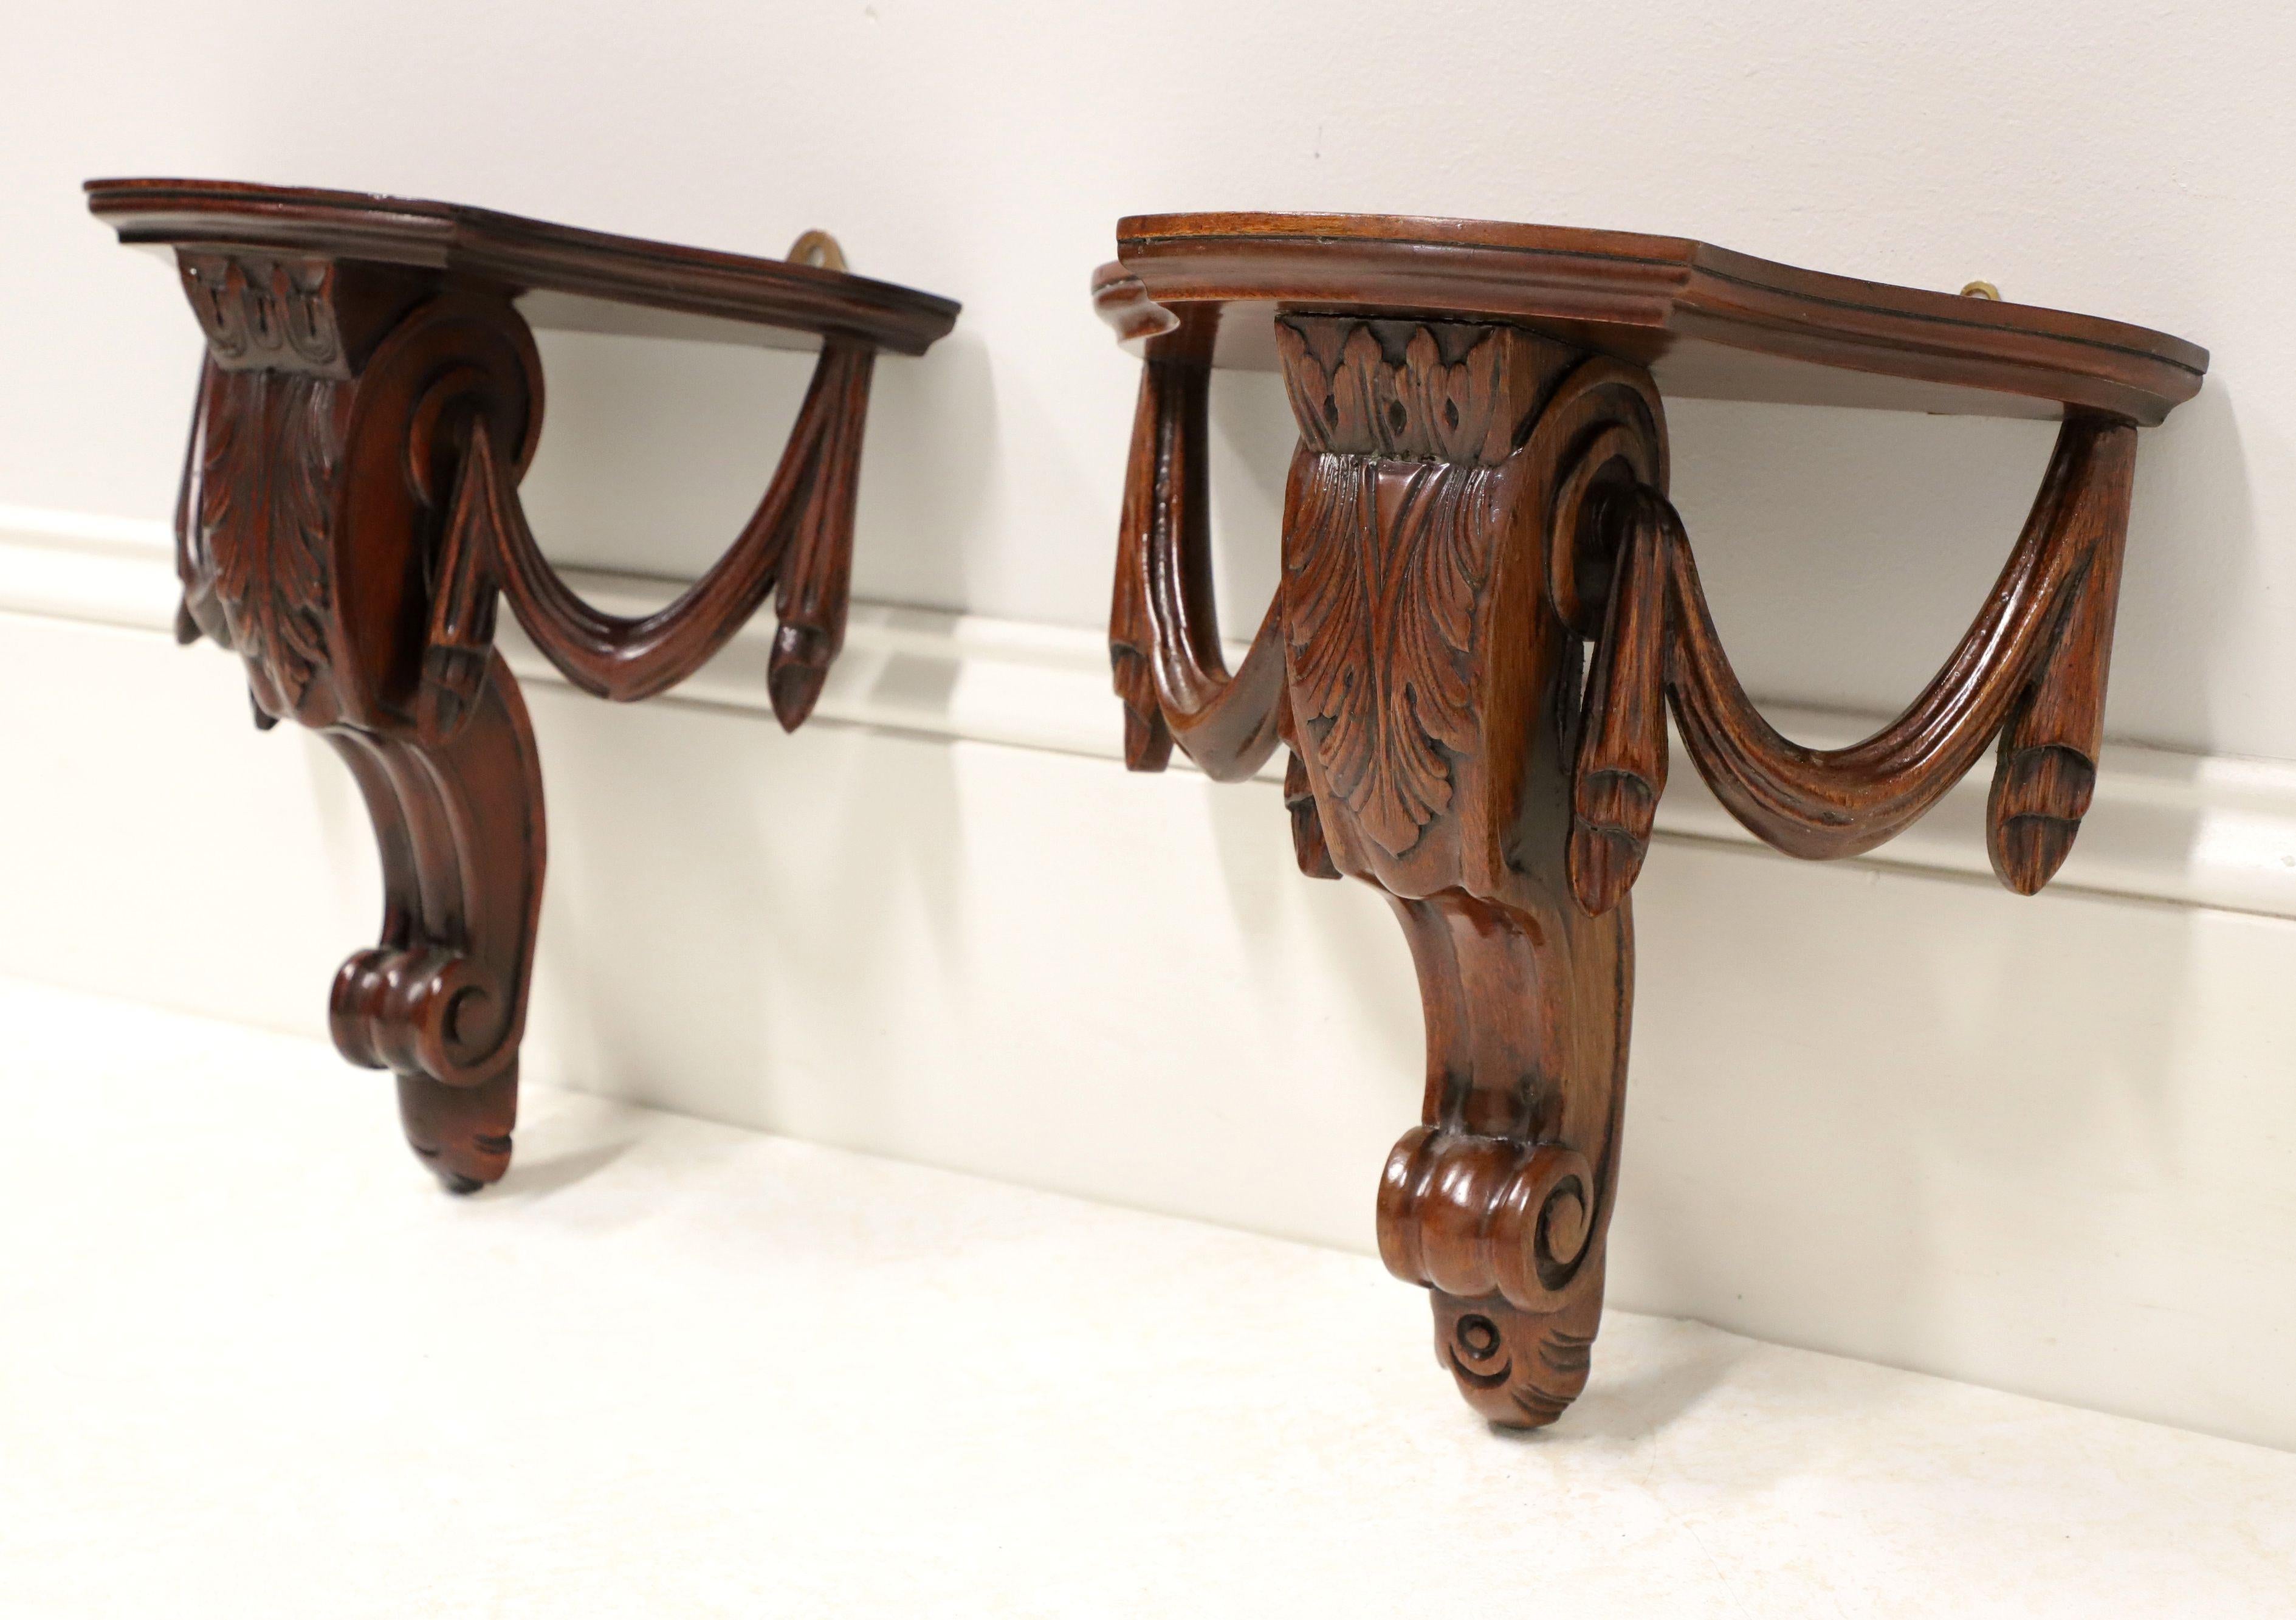 A pair of Chippendale style wall bracket shelves, unbranded. Solid mahogany with flat display surface, center support bracket adorned with carved acanthus leaf, and decorative drapery swags to side brackets. Dual brass hangers on back for wall